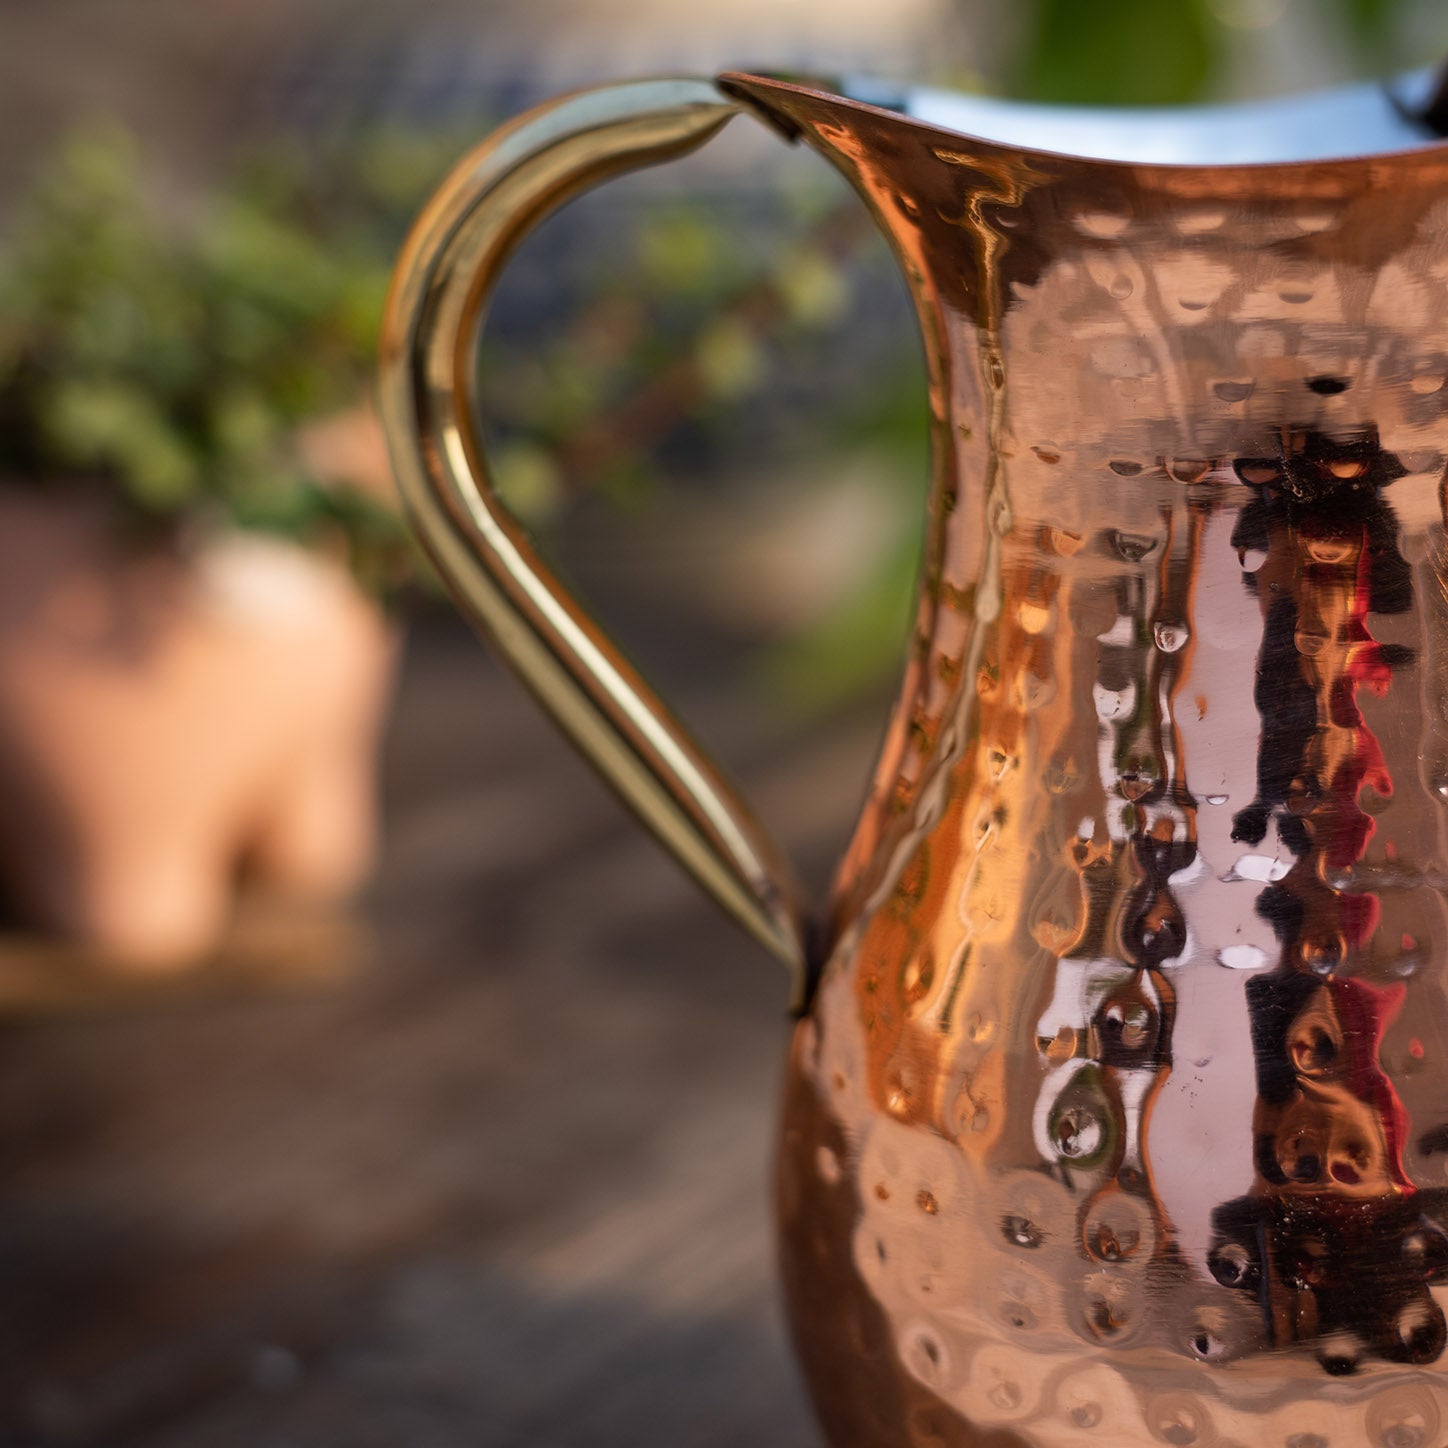 Hammered Copper Water Pitcher - Small